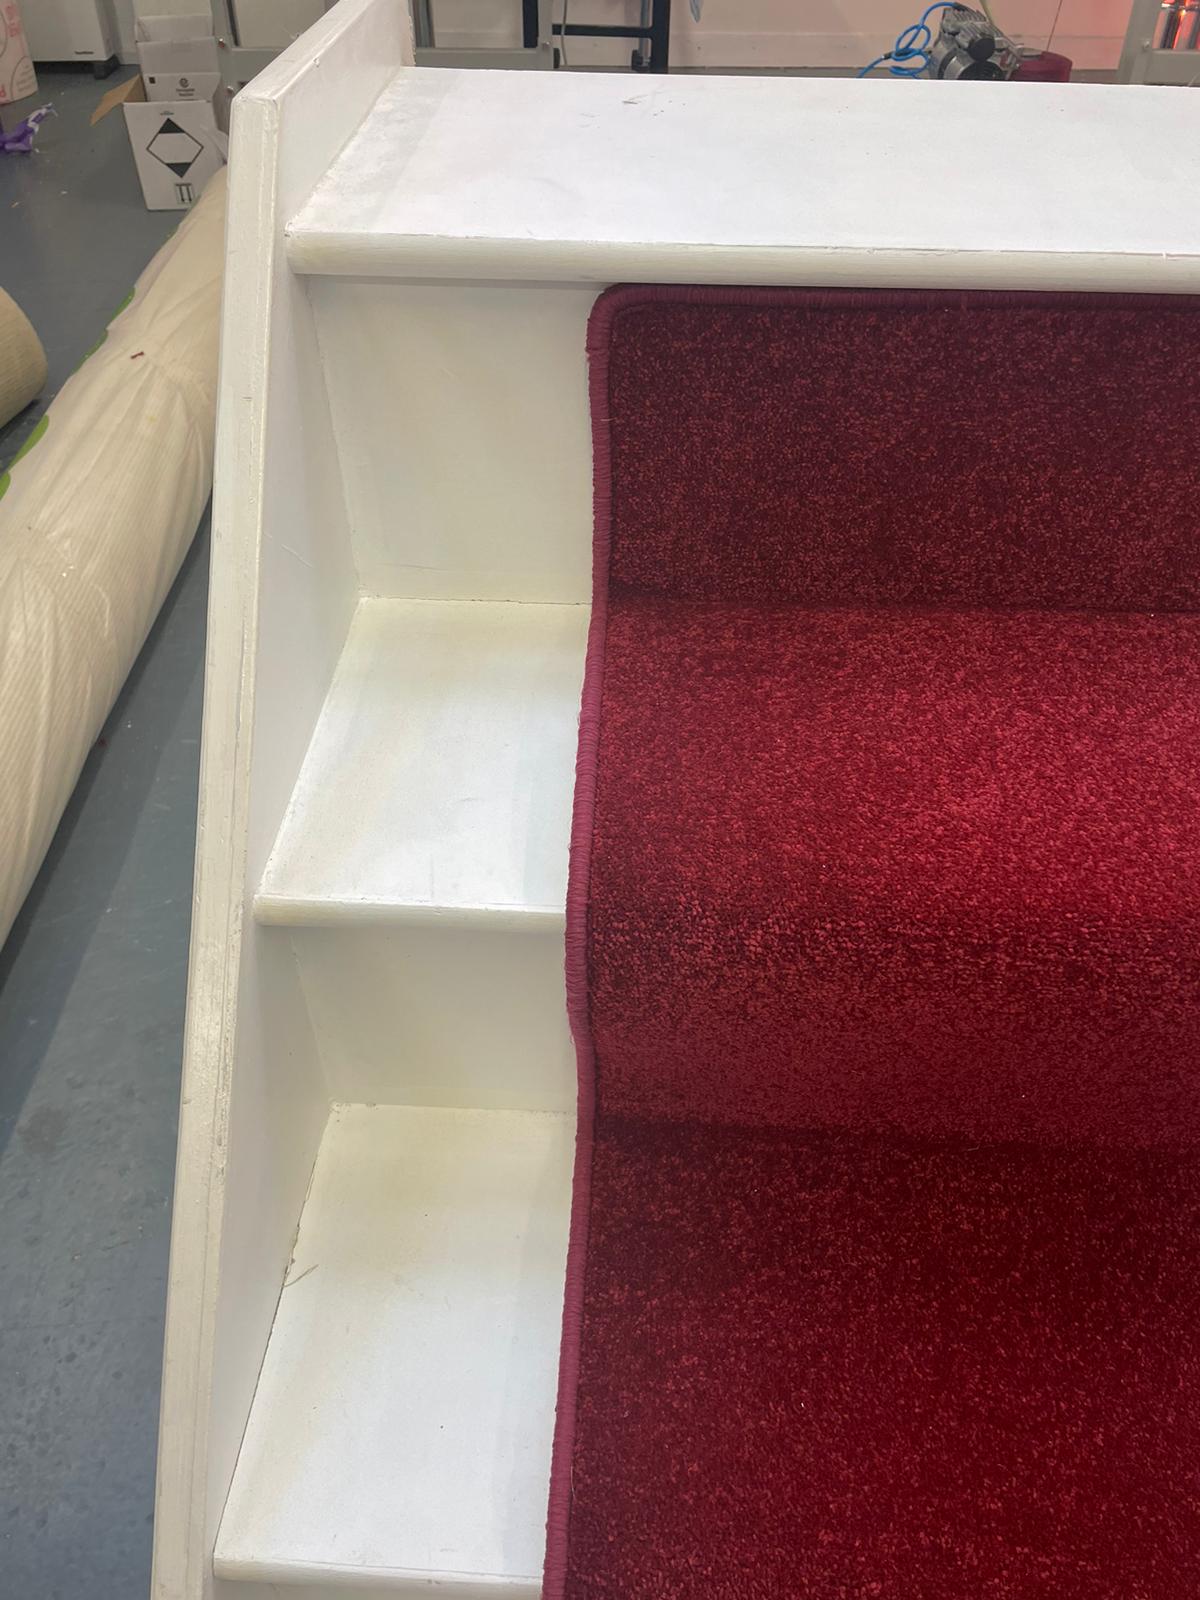 Royal red carpet stair runner with whipped edge and stain resistant